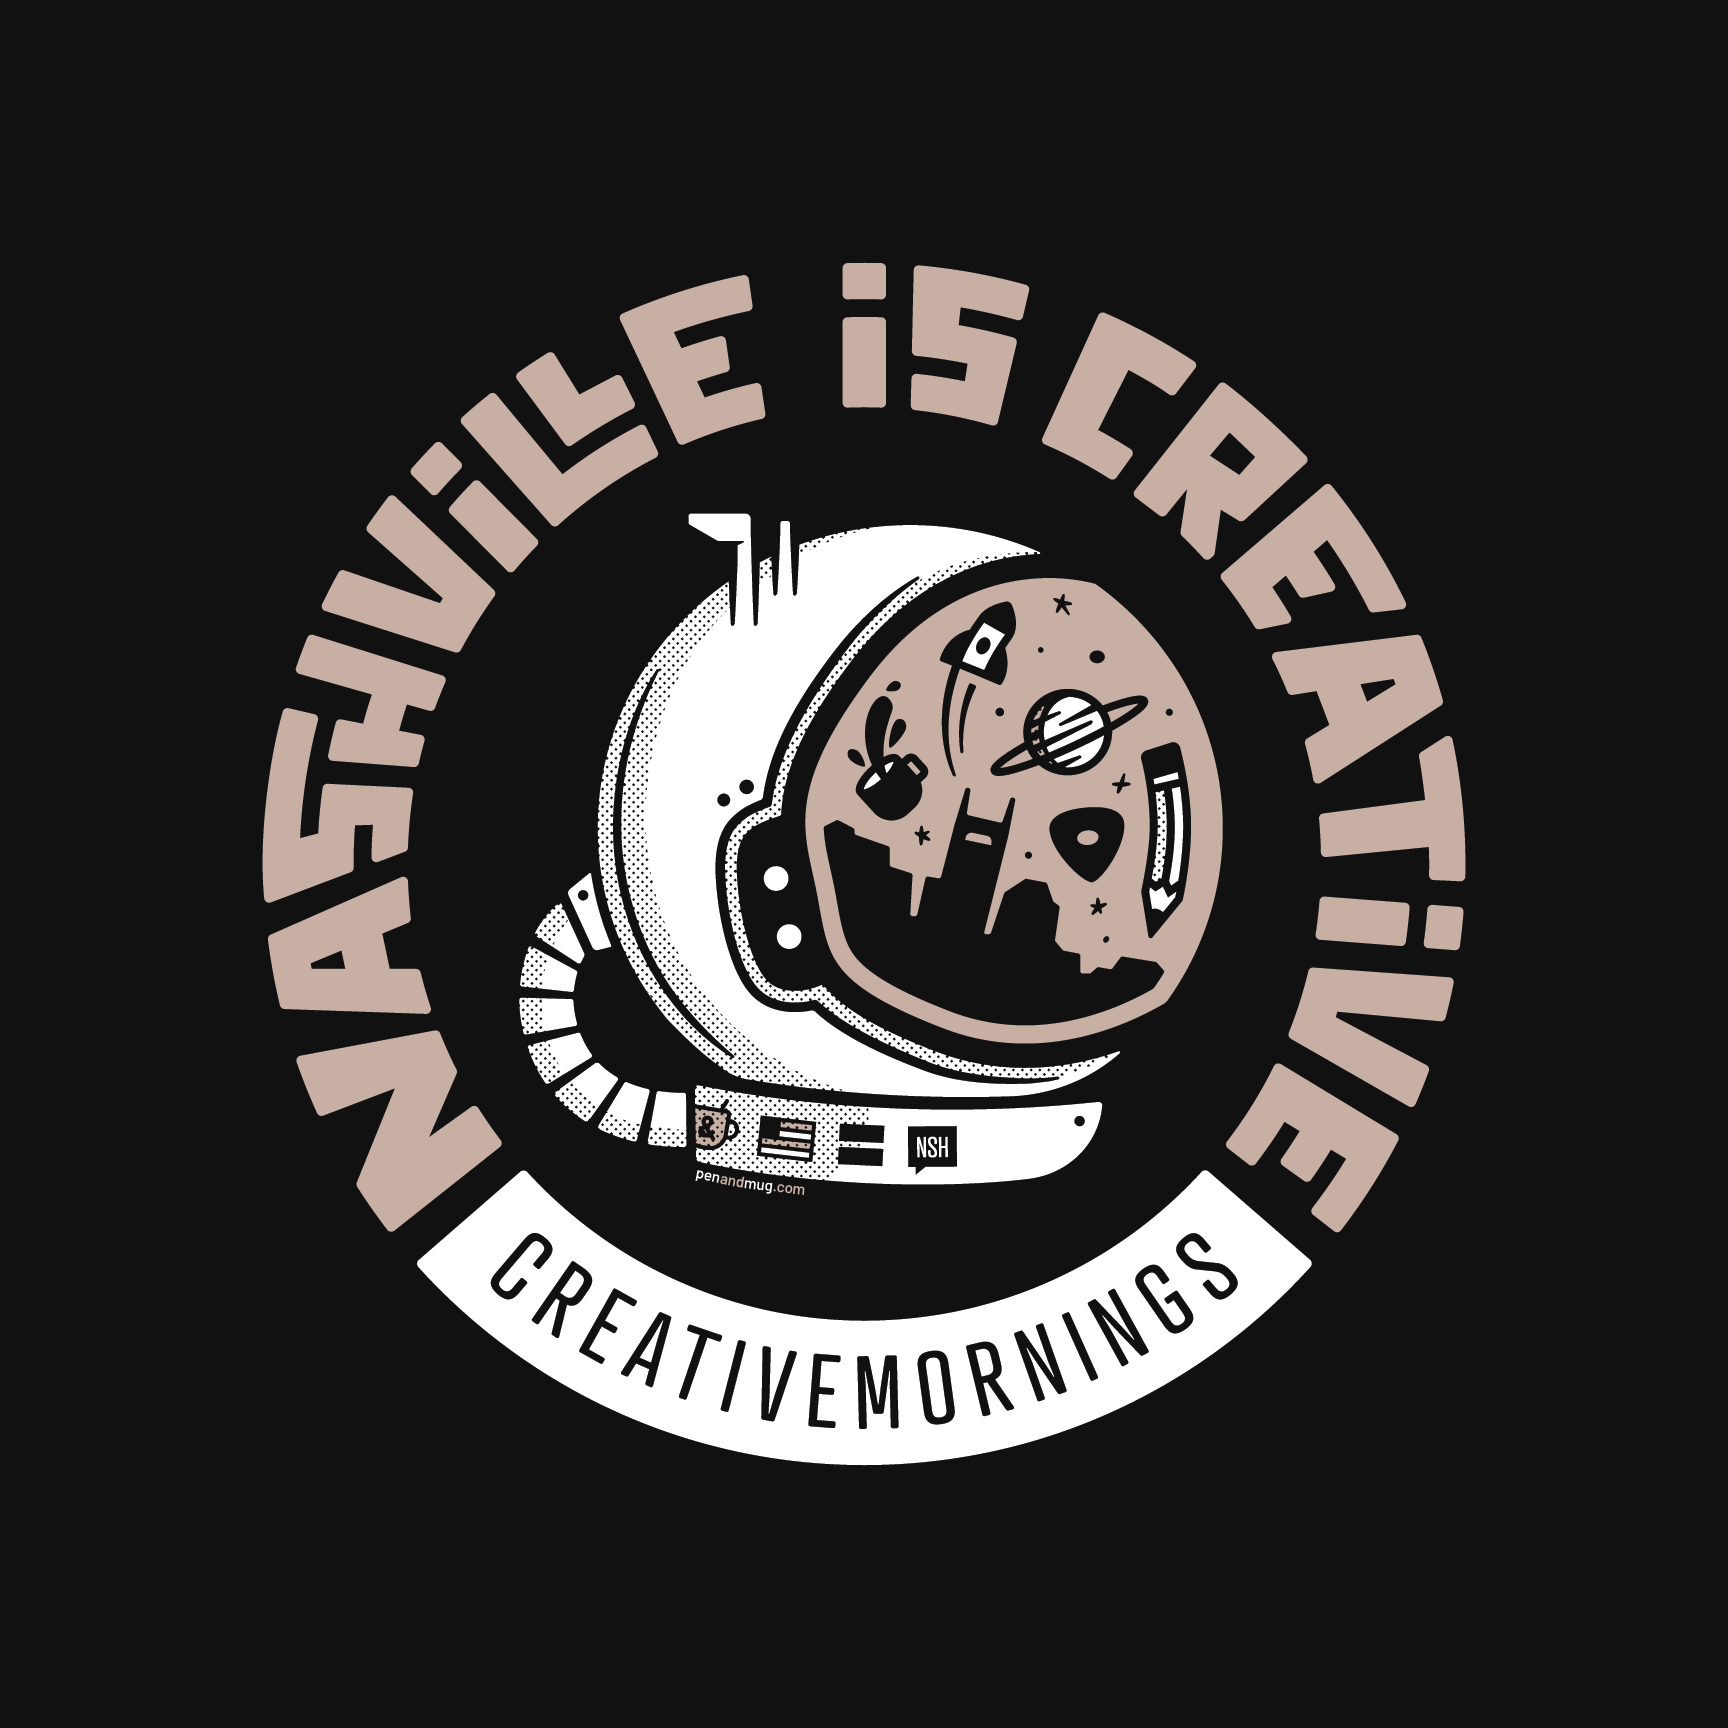 Illustration of an astronaut helmet and the words NASHVILLE IS CREATIVE